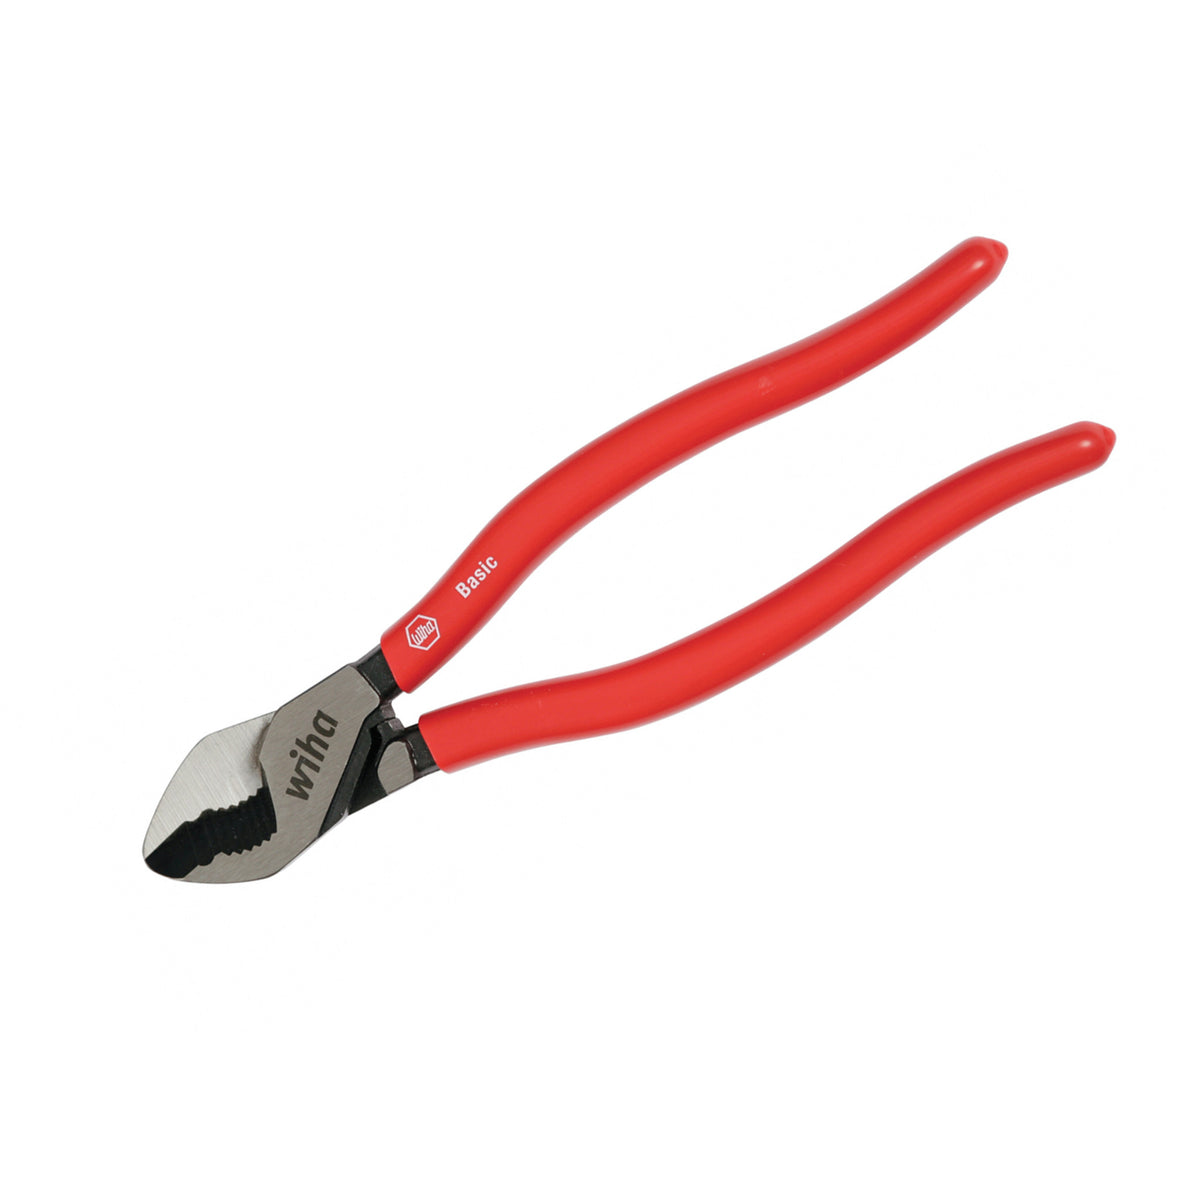 Wiha 32600 Classic Grip Cable Cutters 6.3"